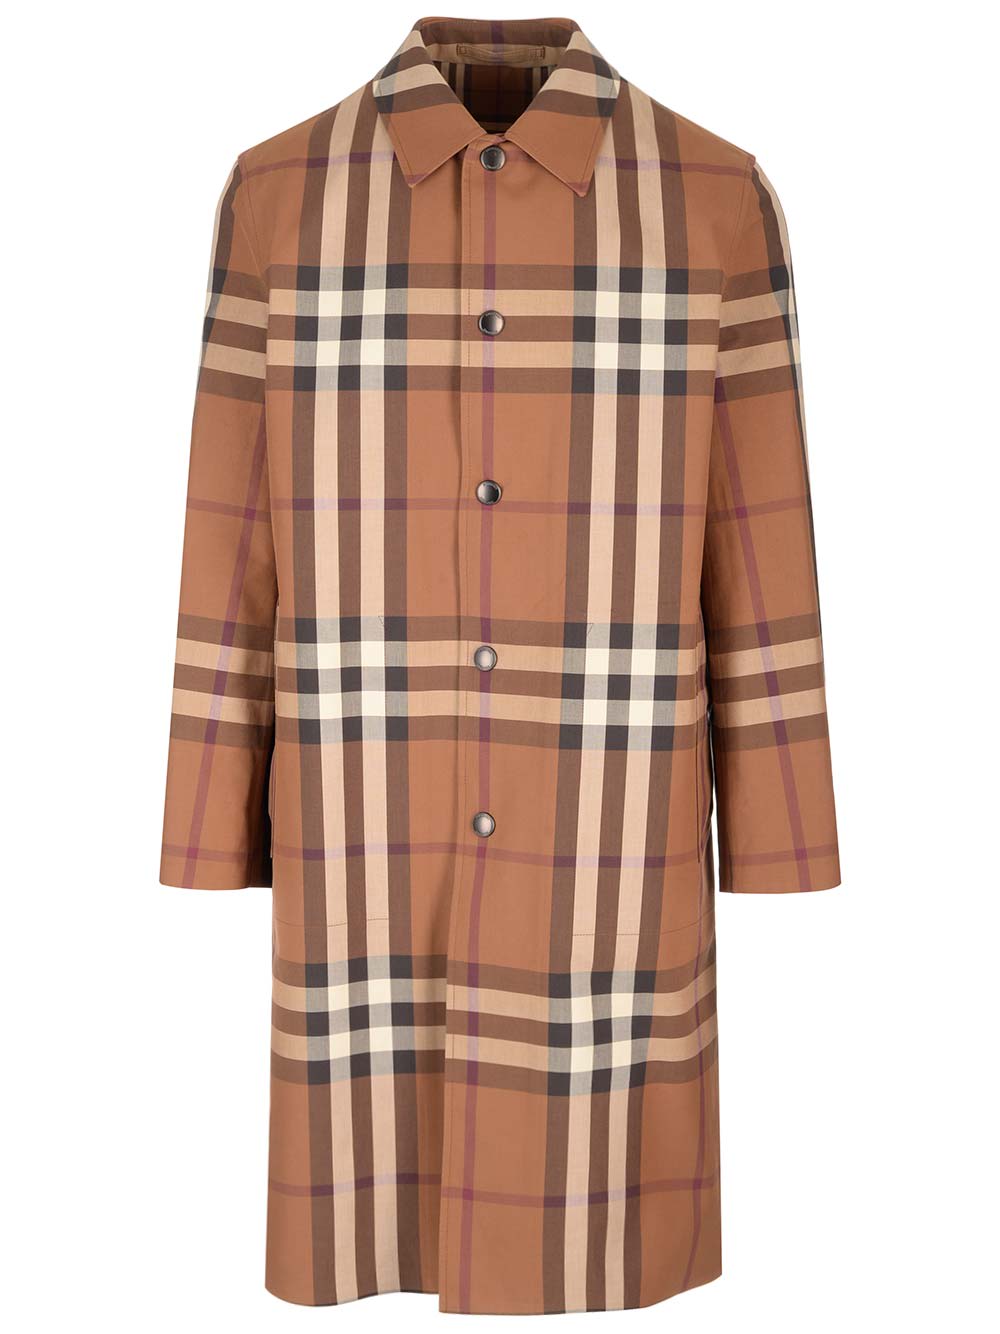 Burberry Reversible Trench Coat With Check Motif